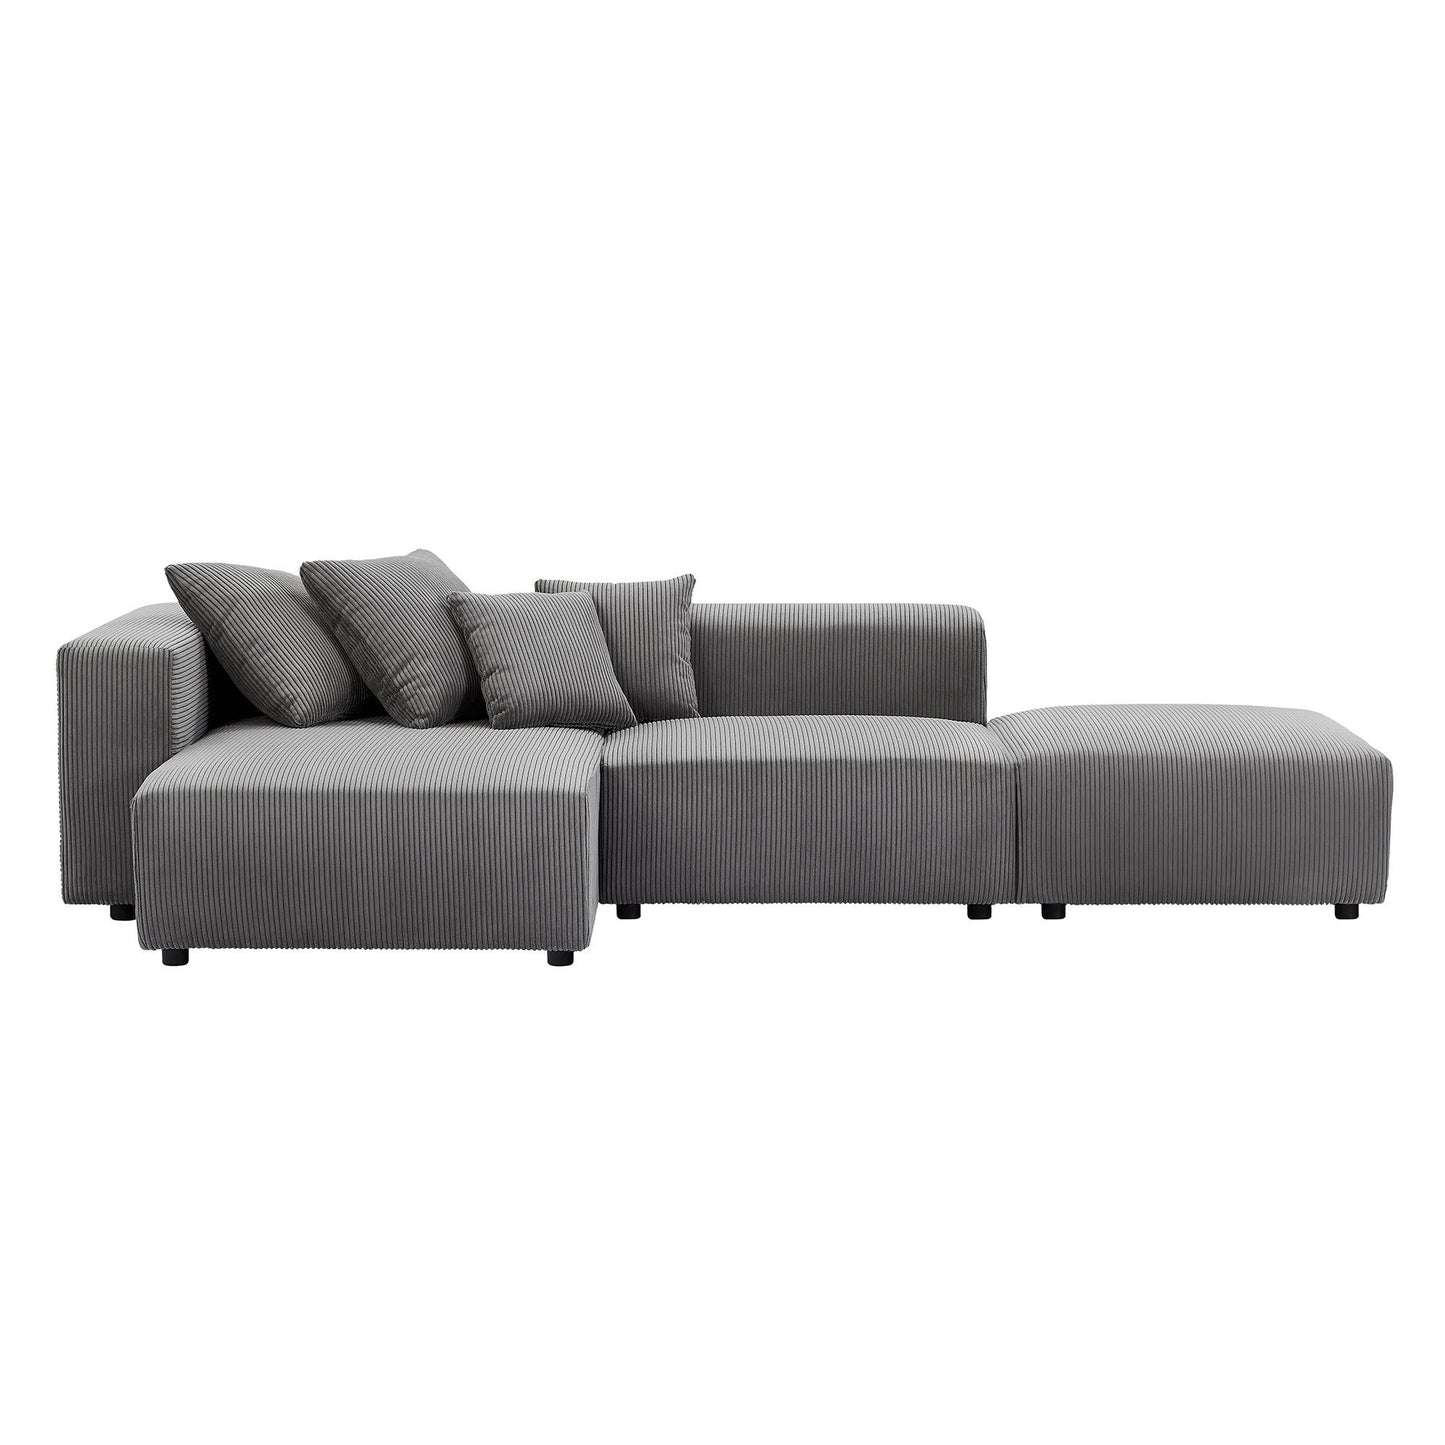 Soft Corduroy Sectional Modular Sofa Set, Small L-Shaped Chaise Couch for Living Room, Apartment, Office, Gray